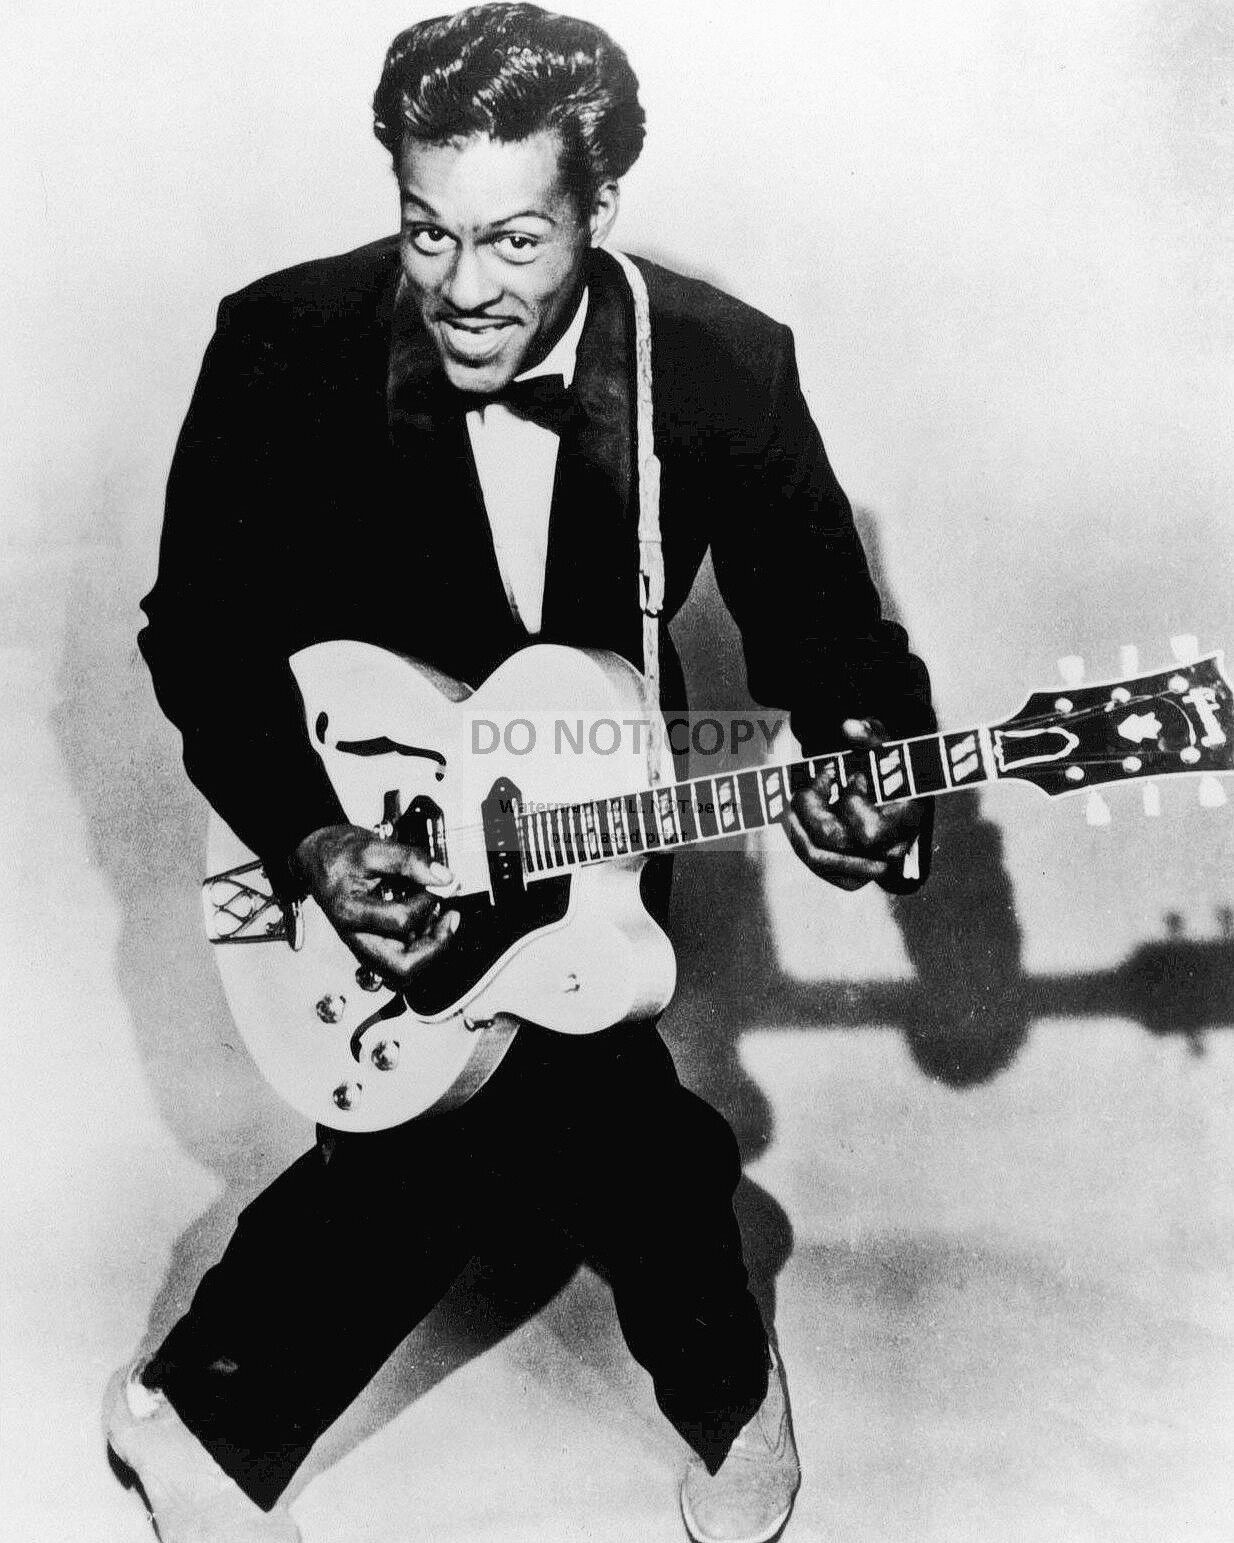 CHUCK BERRY ROCK AND ROLL LEGEND - 8X10 PUBLICITY PHOTO (RT112)